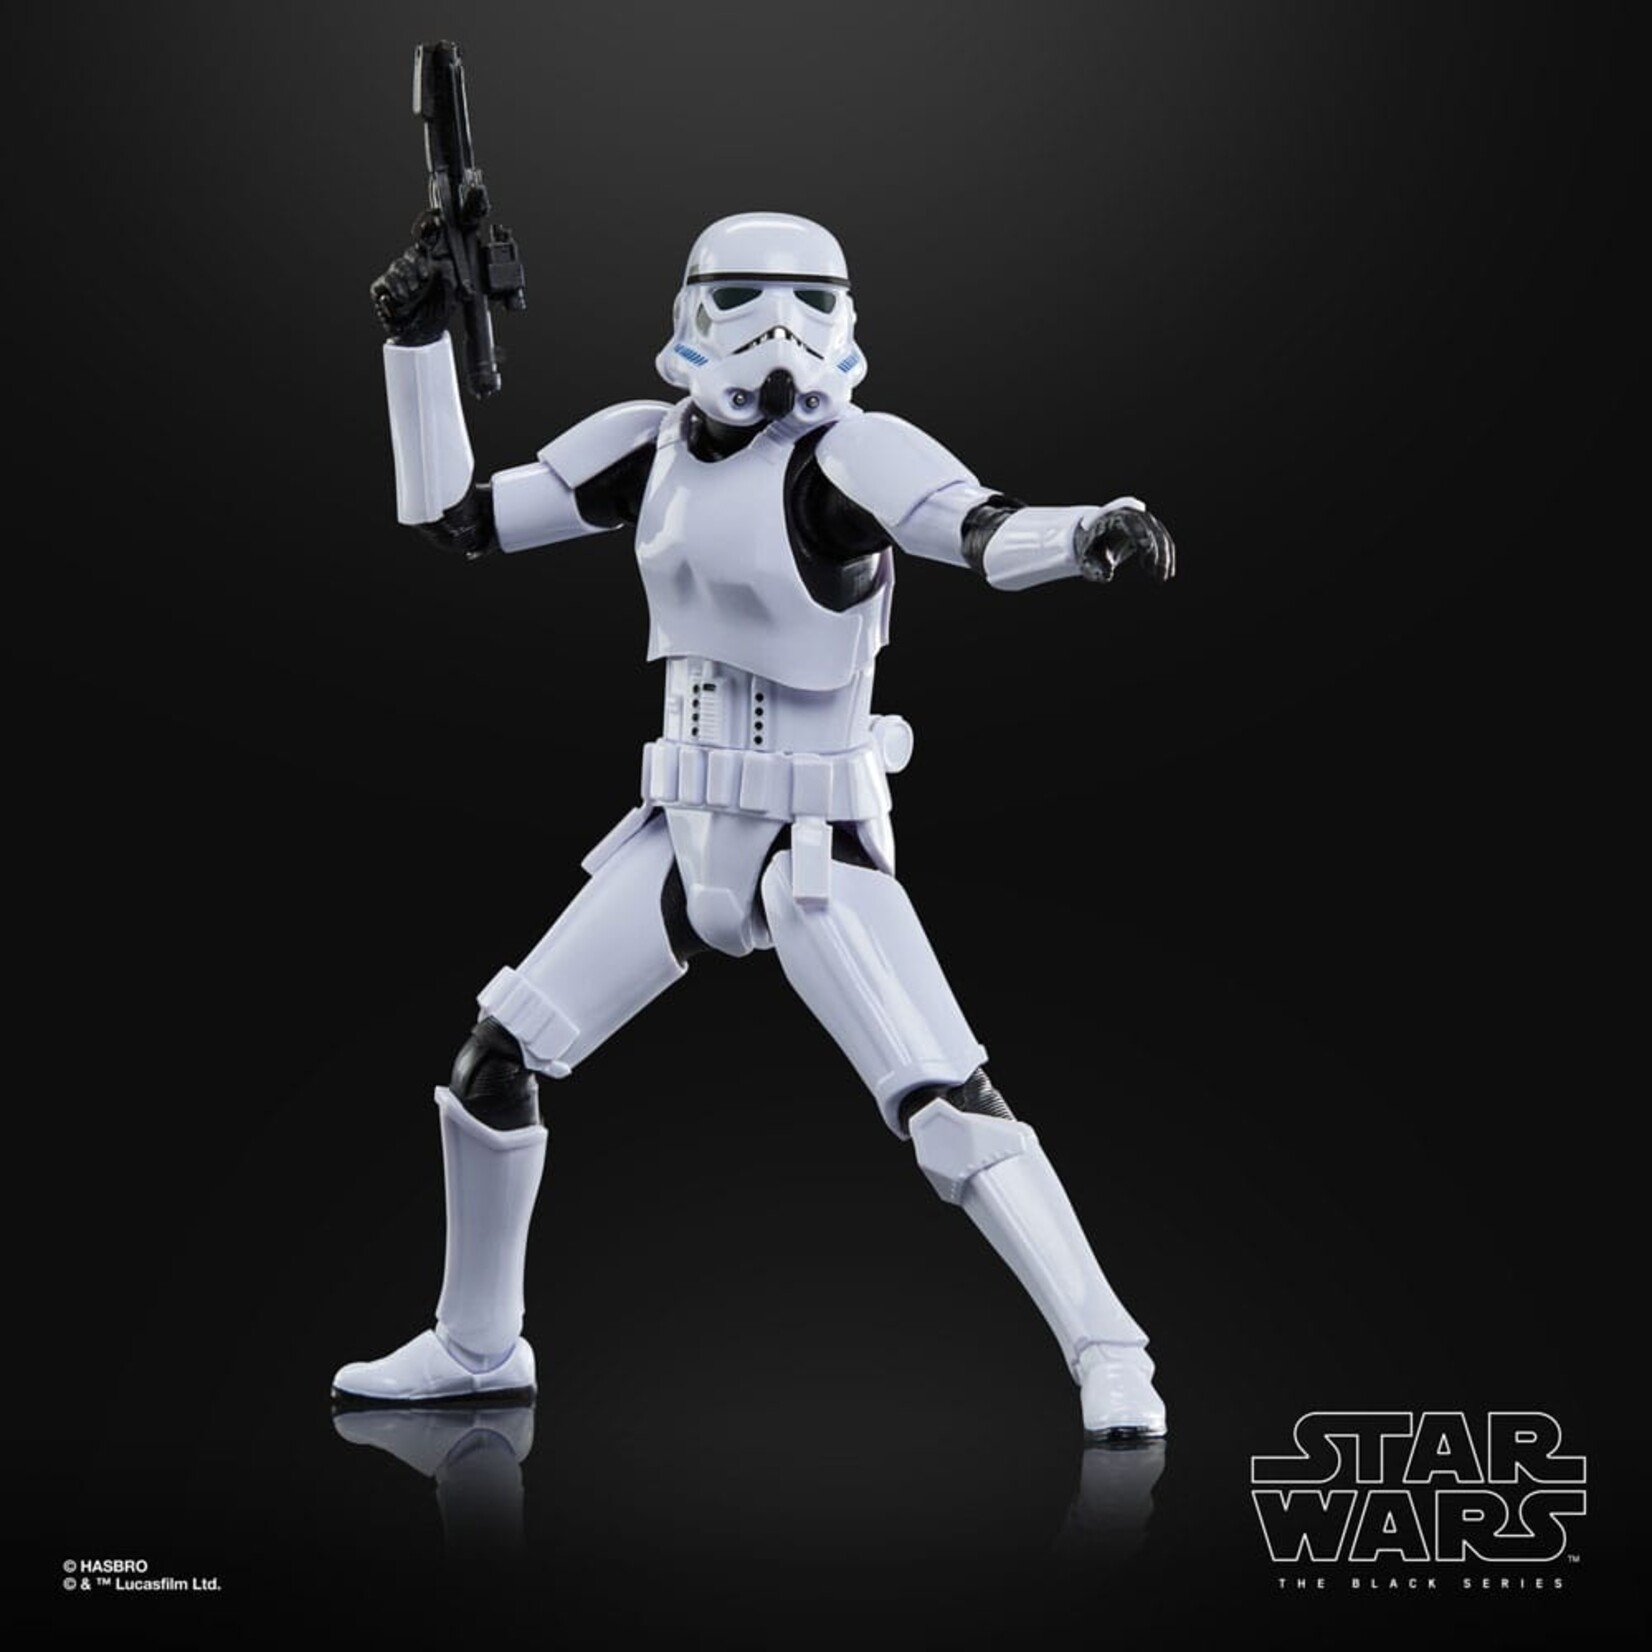 Hasbro Hasbro Star Wars The Black Series Archive Action Figure Imperial Stormtrooper 15 cm